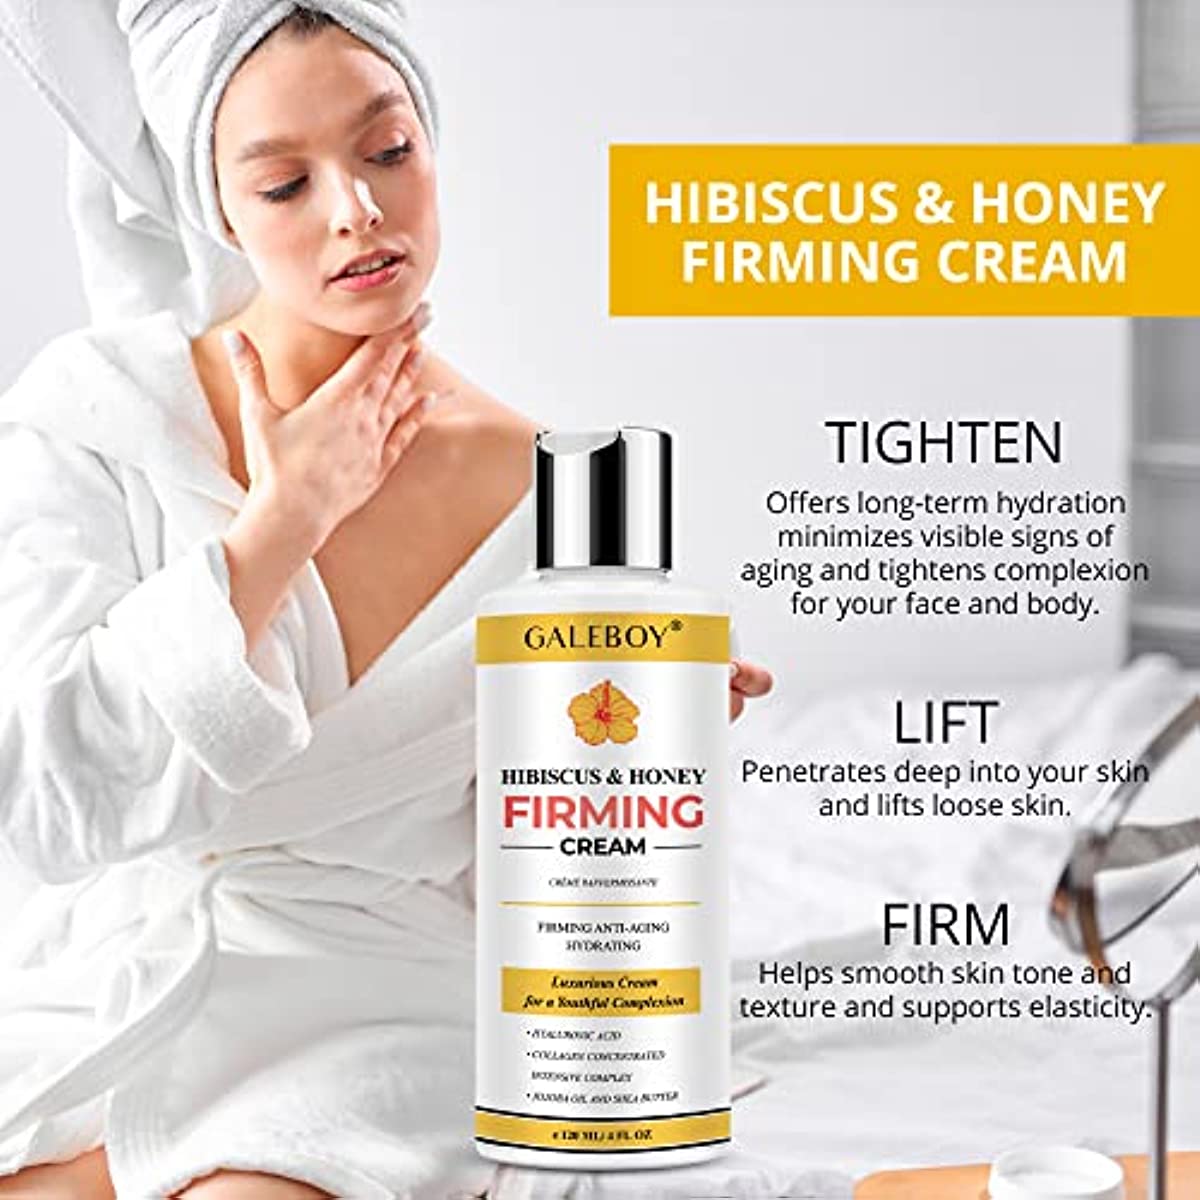 Hibiscus and Honey Firming Cream, Neck Firming Cream, Double Chin Reducer, Skin Firming and Tightening Lotion Cream, Neck Cream for Sagging Skin, Body Tight Cellulite Cream, Firming Lotion for Body Loose Skin-Anti Aging, Lifting, Anti Wrinkles-With Collagen & Hyaluronic Acid-4 oz 120ml